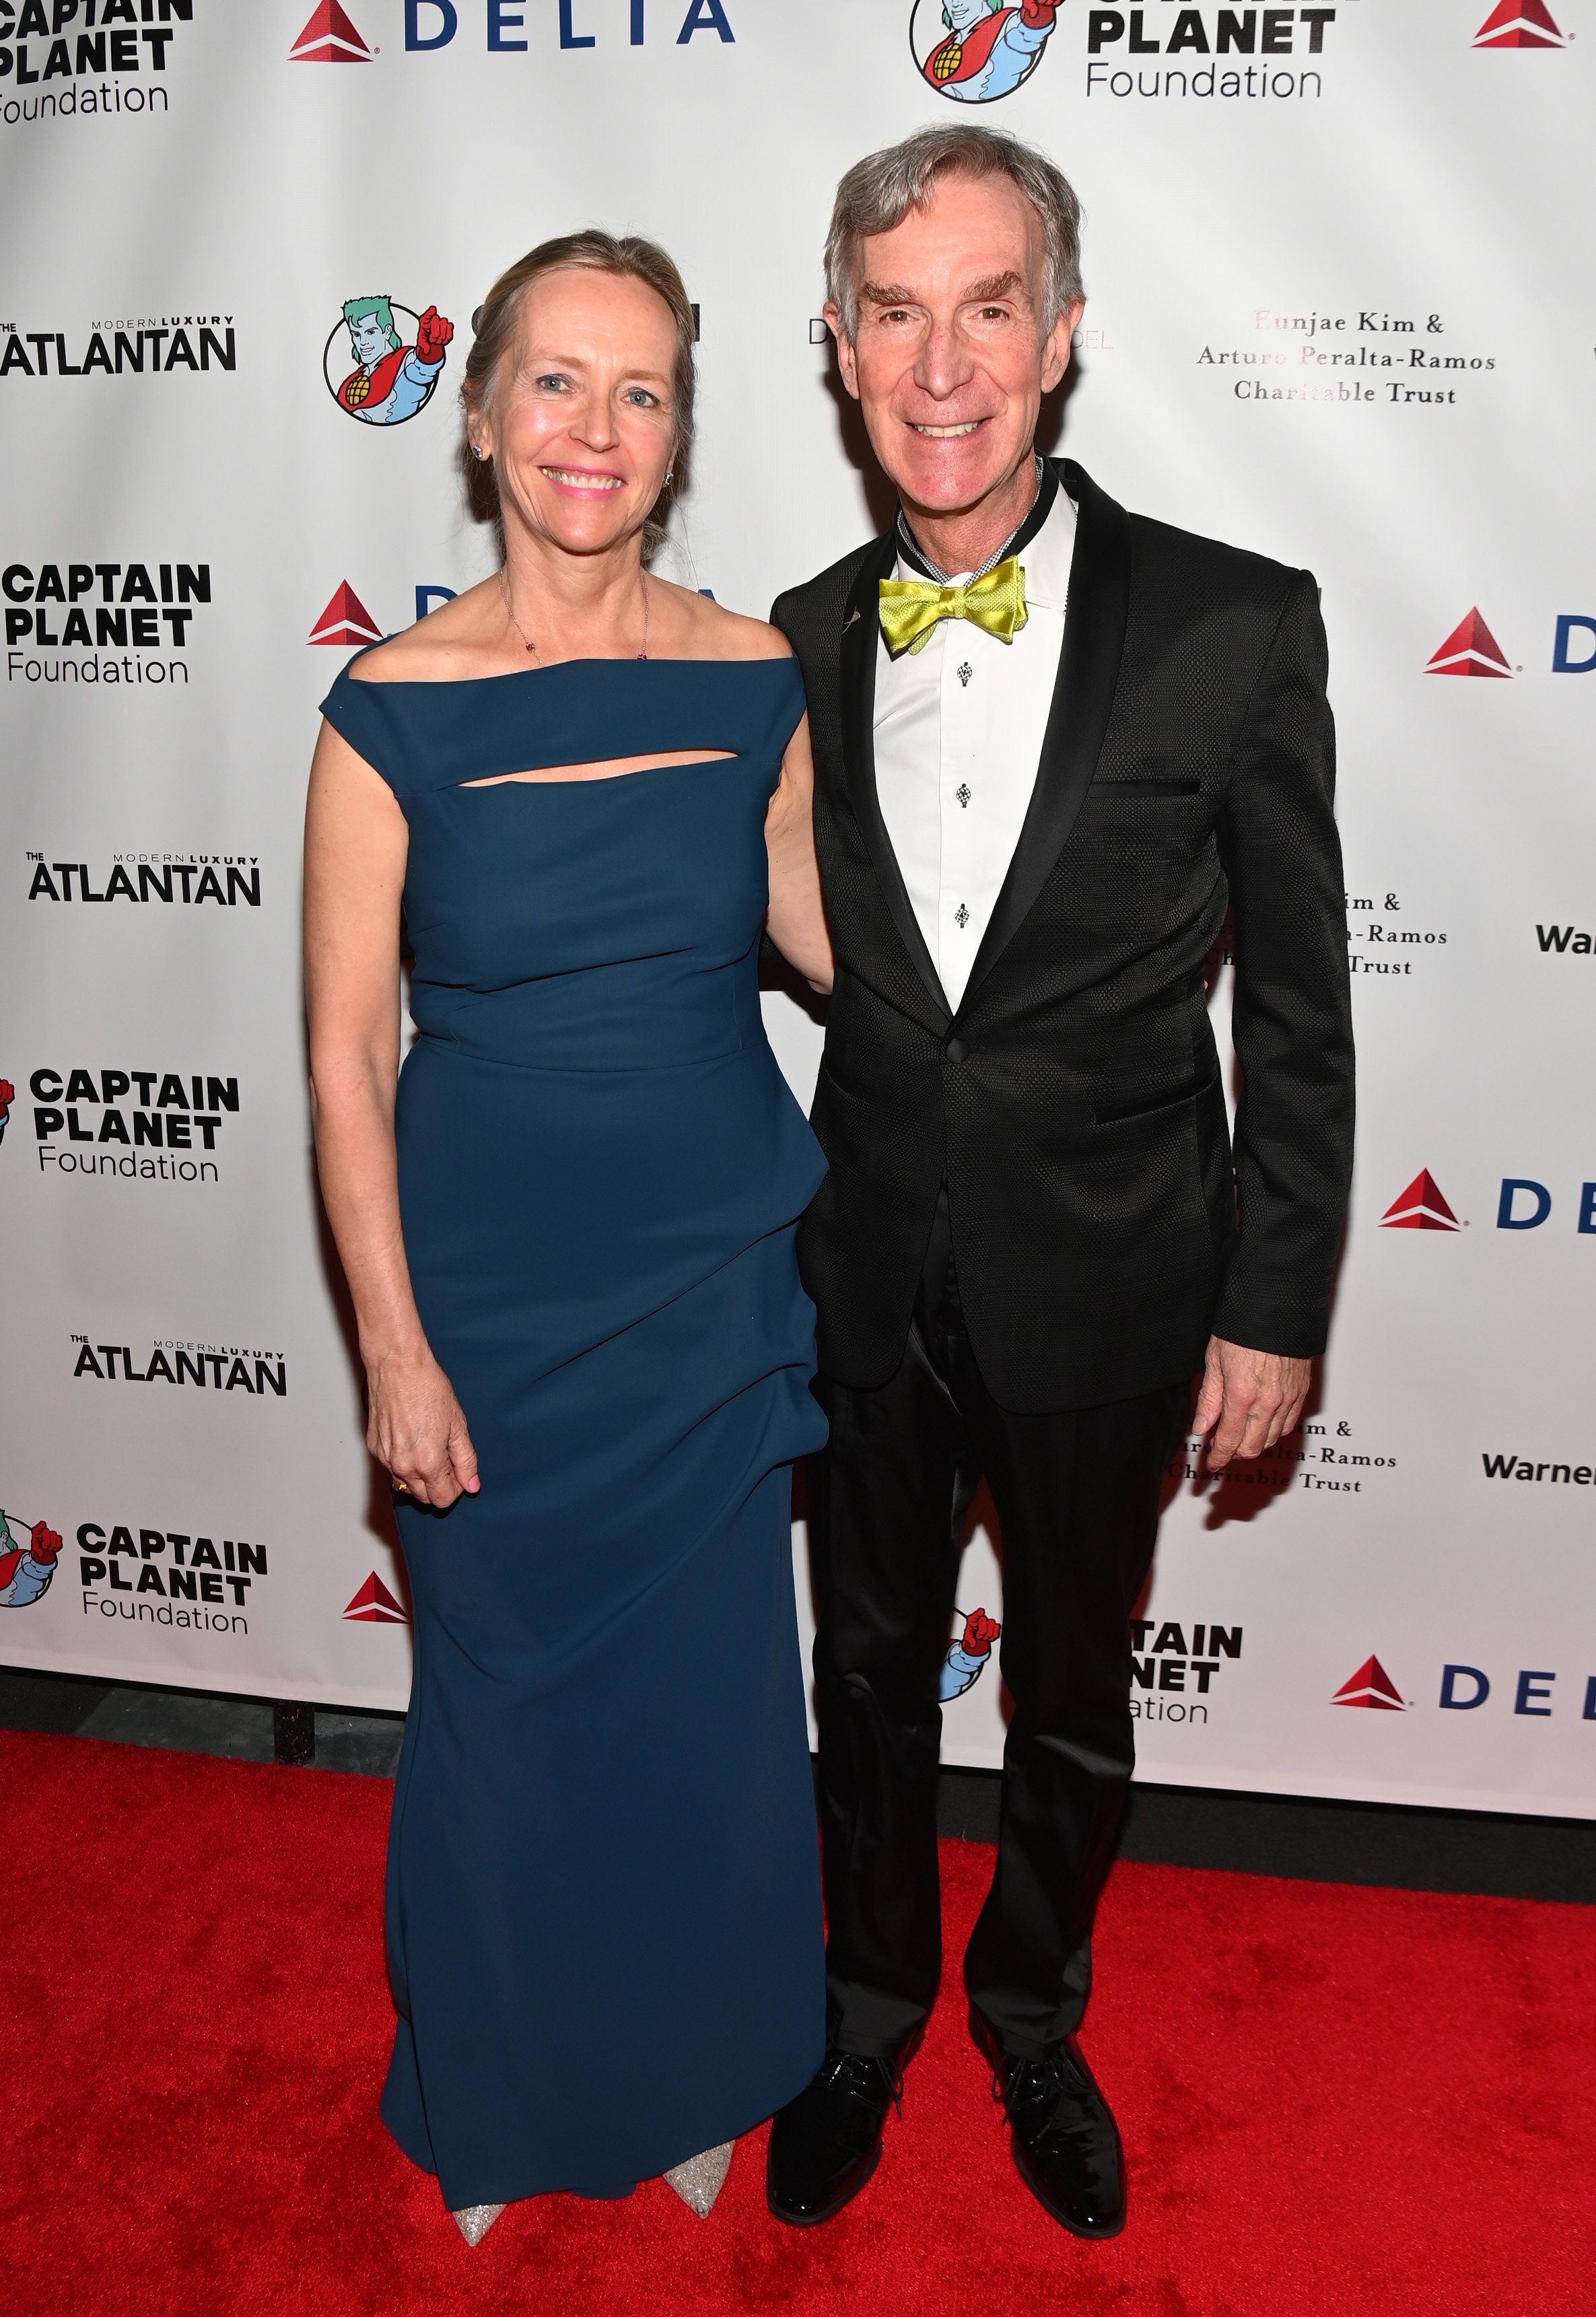 Liza Mundy and Bill Nye at the Captain Planet Foundation 30th Anniversary Gala on March 19, 2022 in Atlanta, Georgia. | Source: Getty Images 